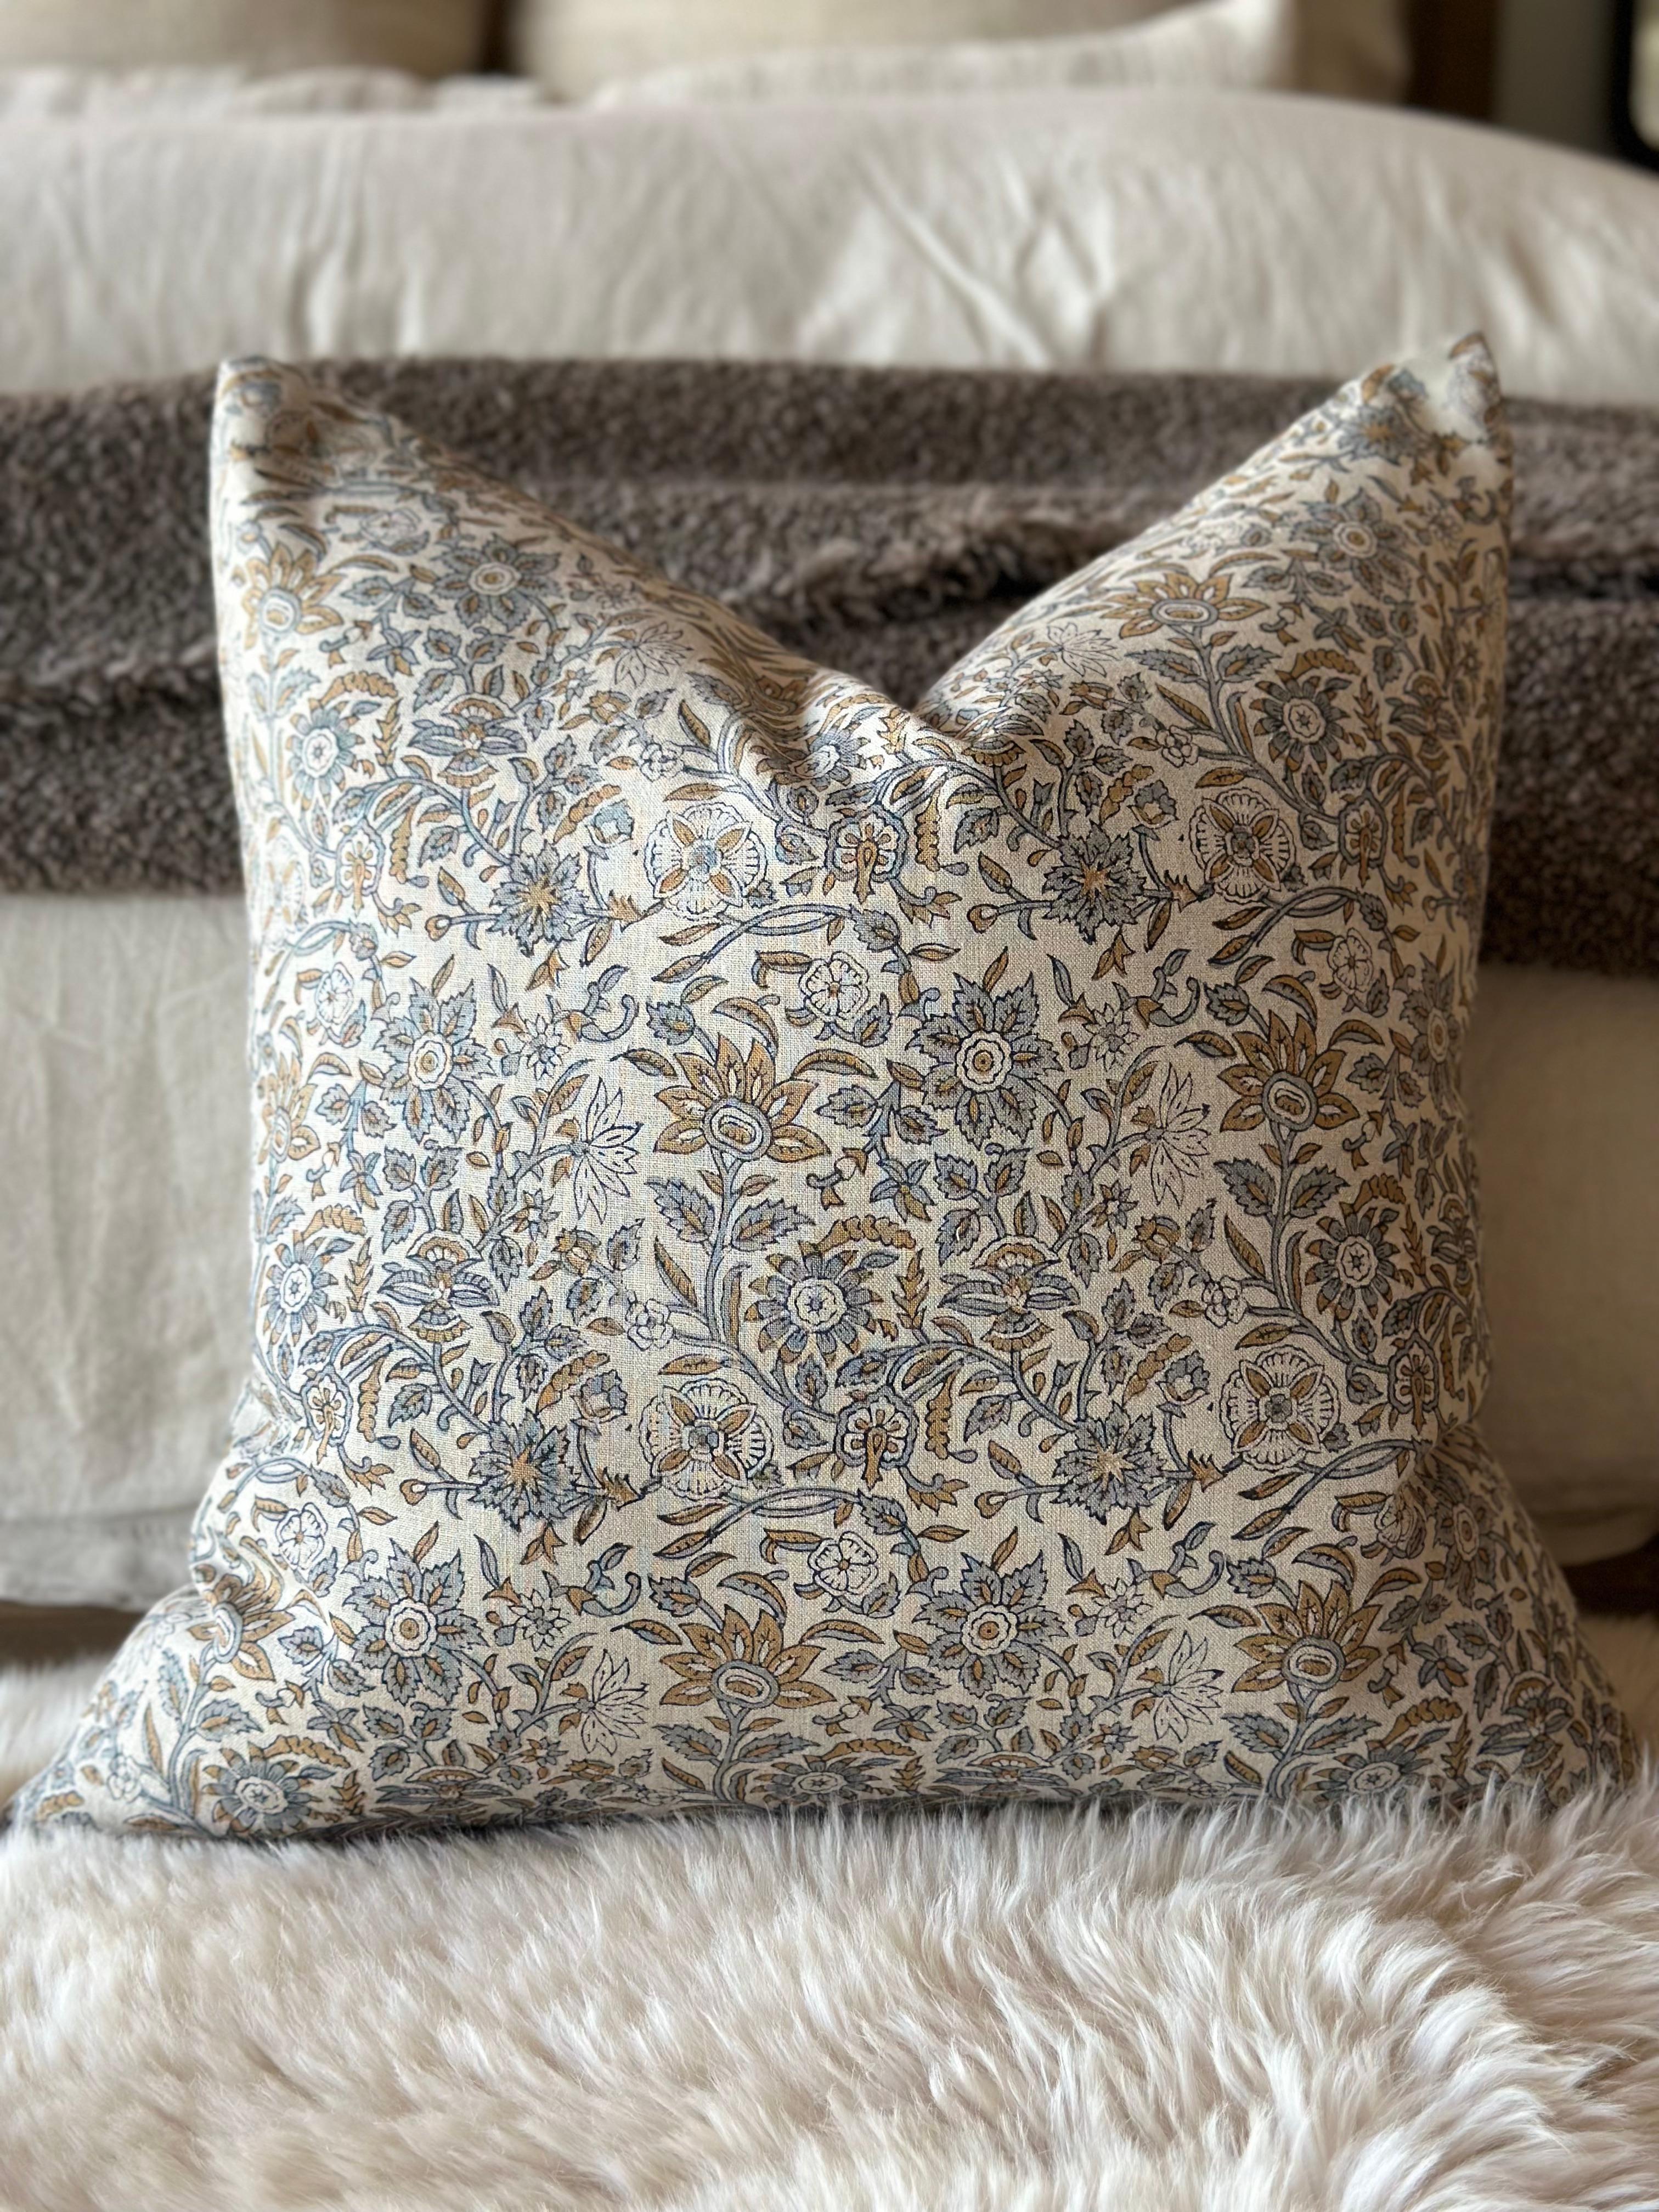 Visalia Block Printed Linen Pillow with Down Feather Insert In New Condition For Sale In Brea, CA